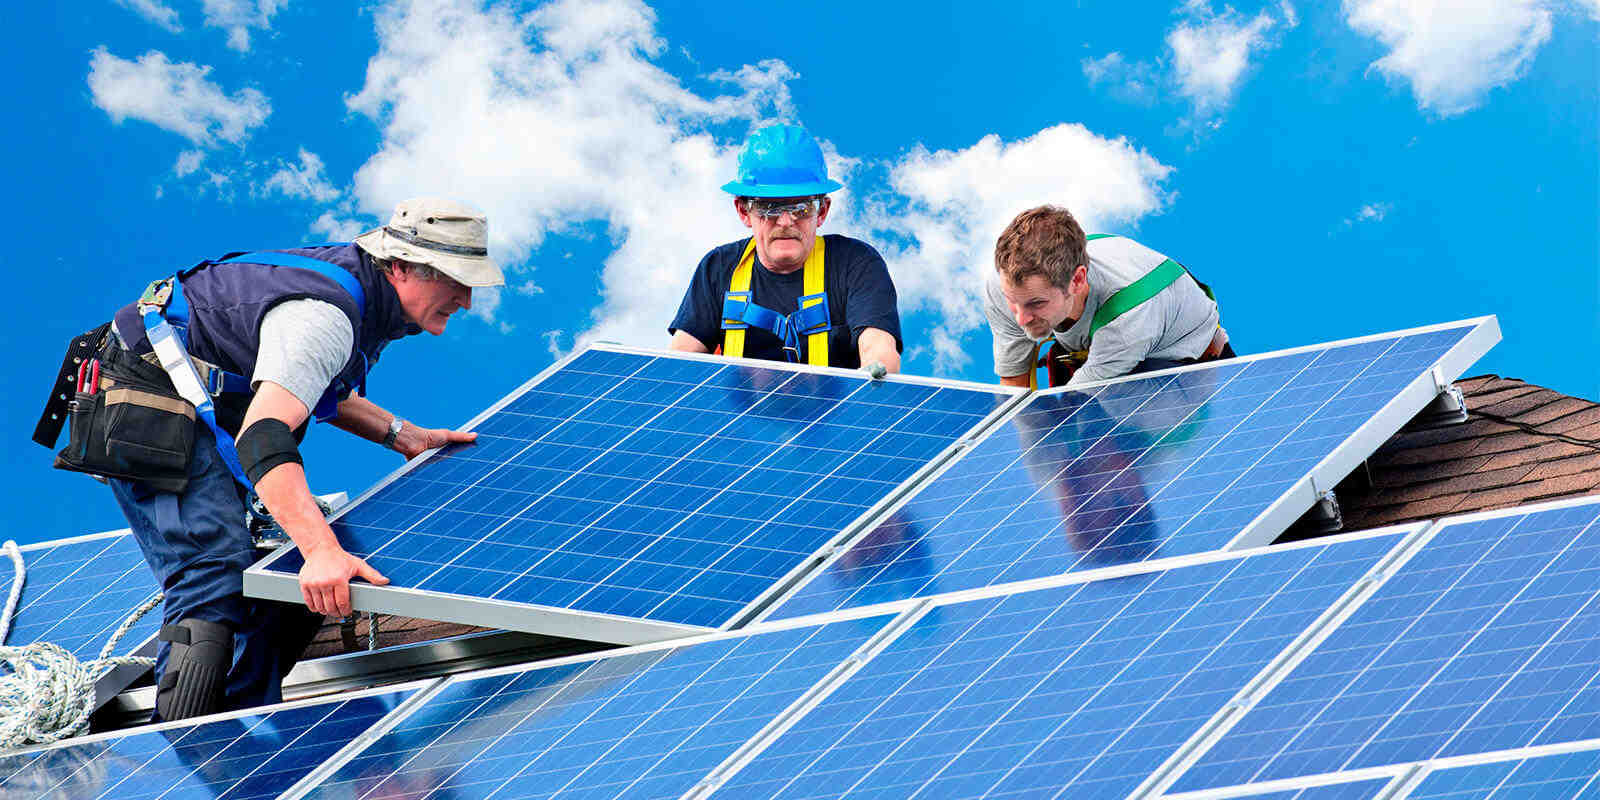 What are the top 5 solar companies?